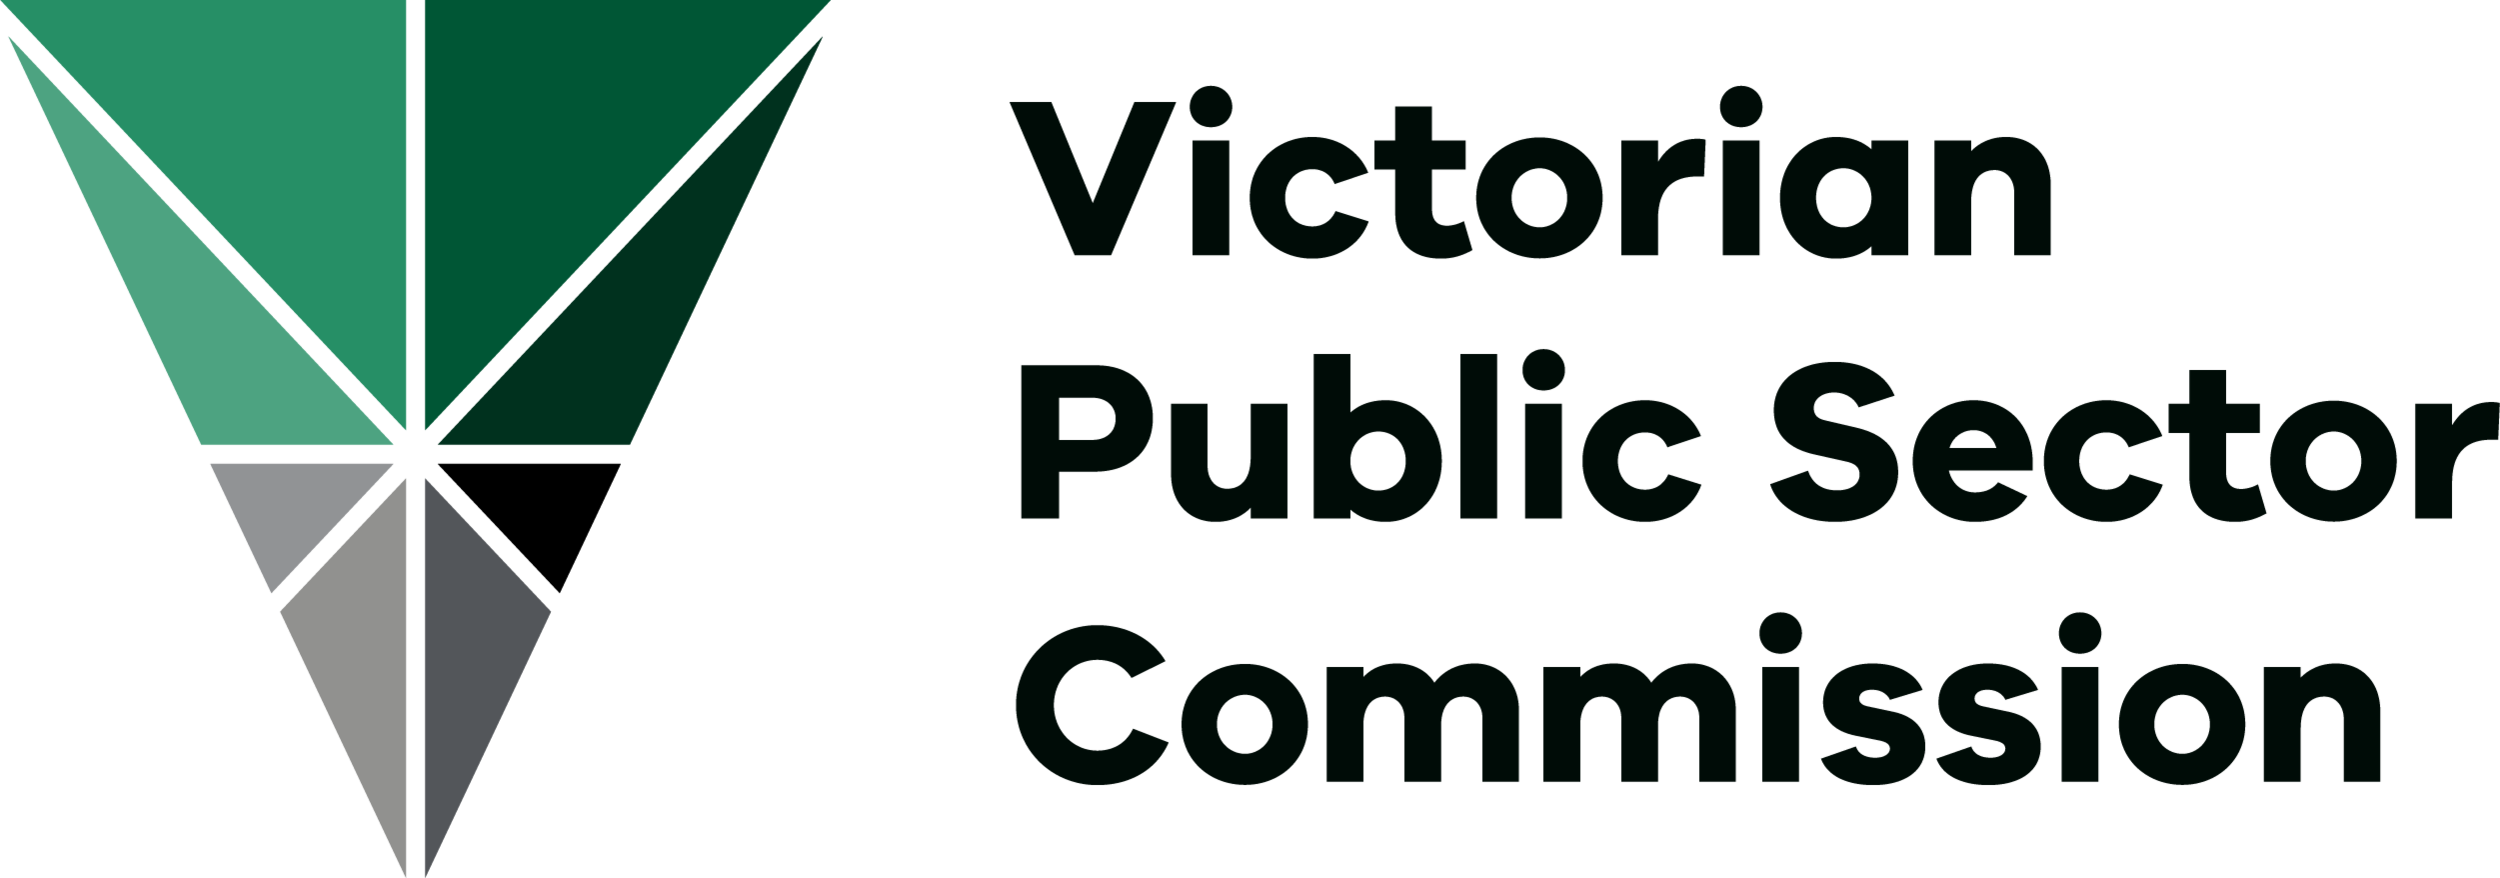 The Victorian Public Sector Commission has partnered with IPAA Victoria to recognise leadership in our public purpose sector.